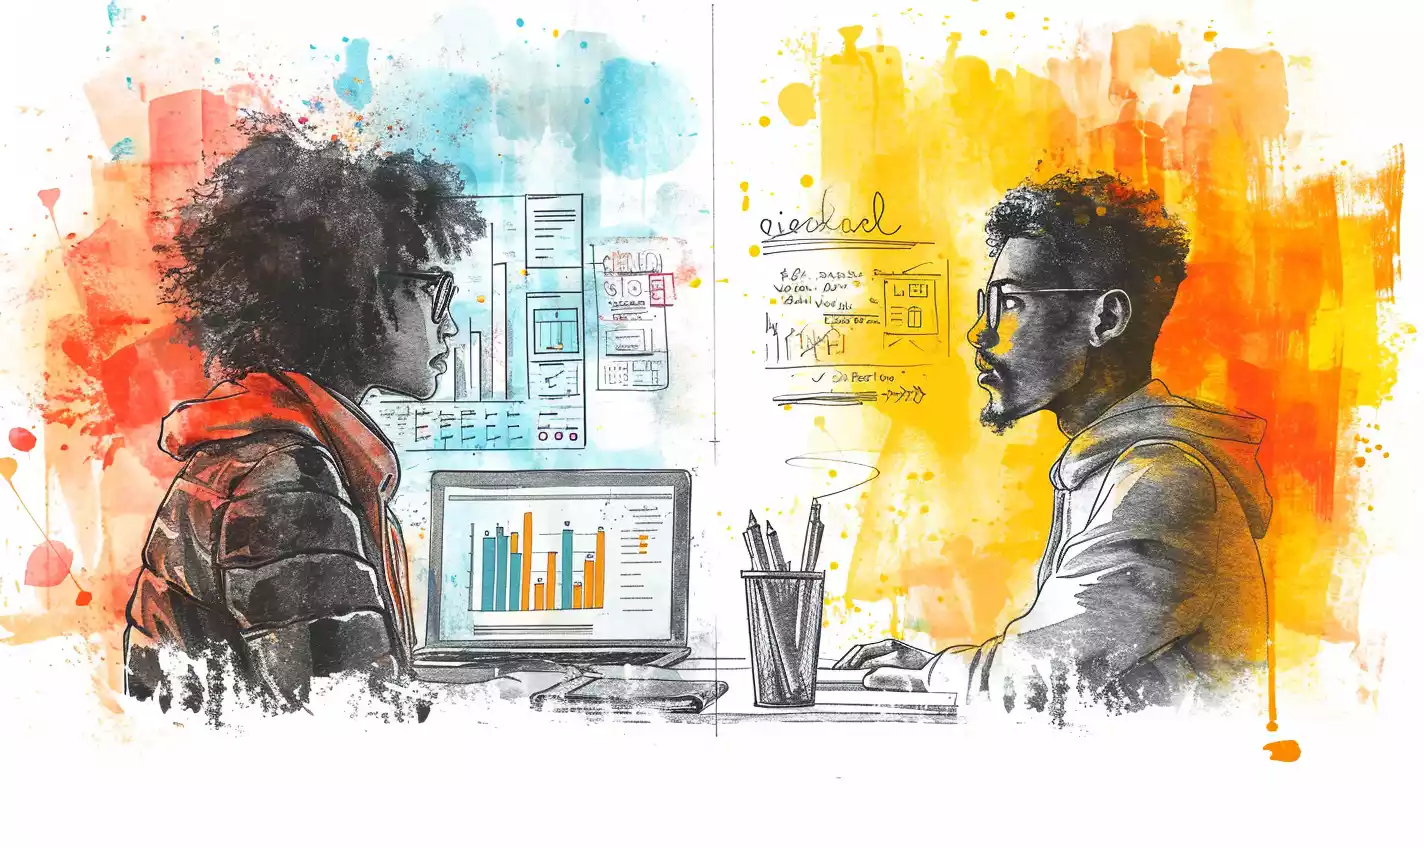 an hand-drawn sketch illustration of two side-by-side scenes, one showing a startup founder preparing for an online meeting with technology, charts and graphs, and the other showing the same founder preparing for an in-person meeting with physical documents